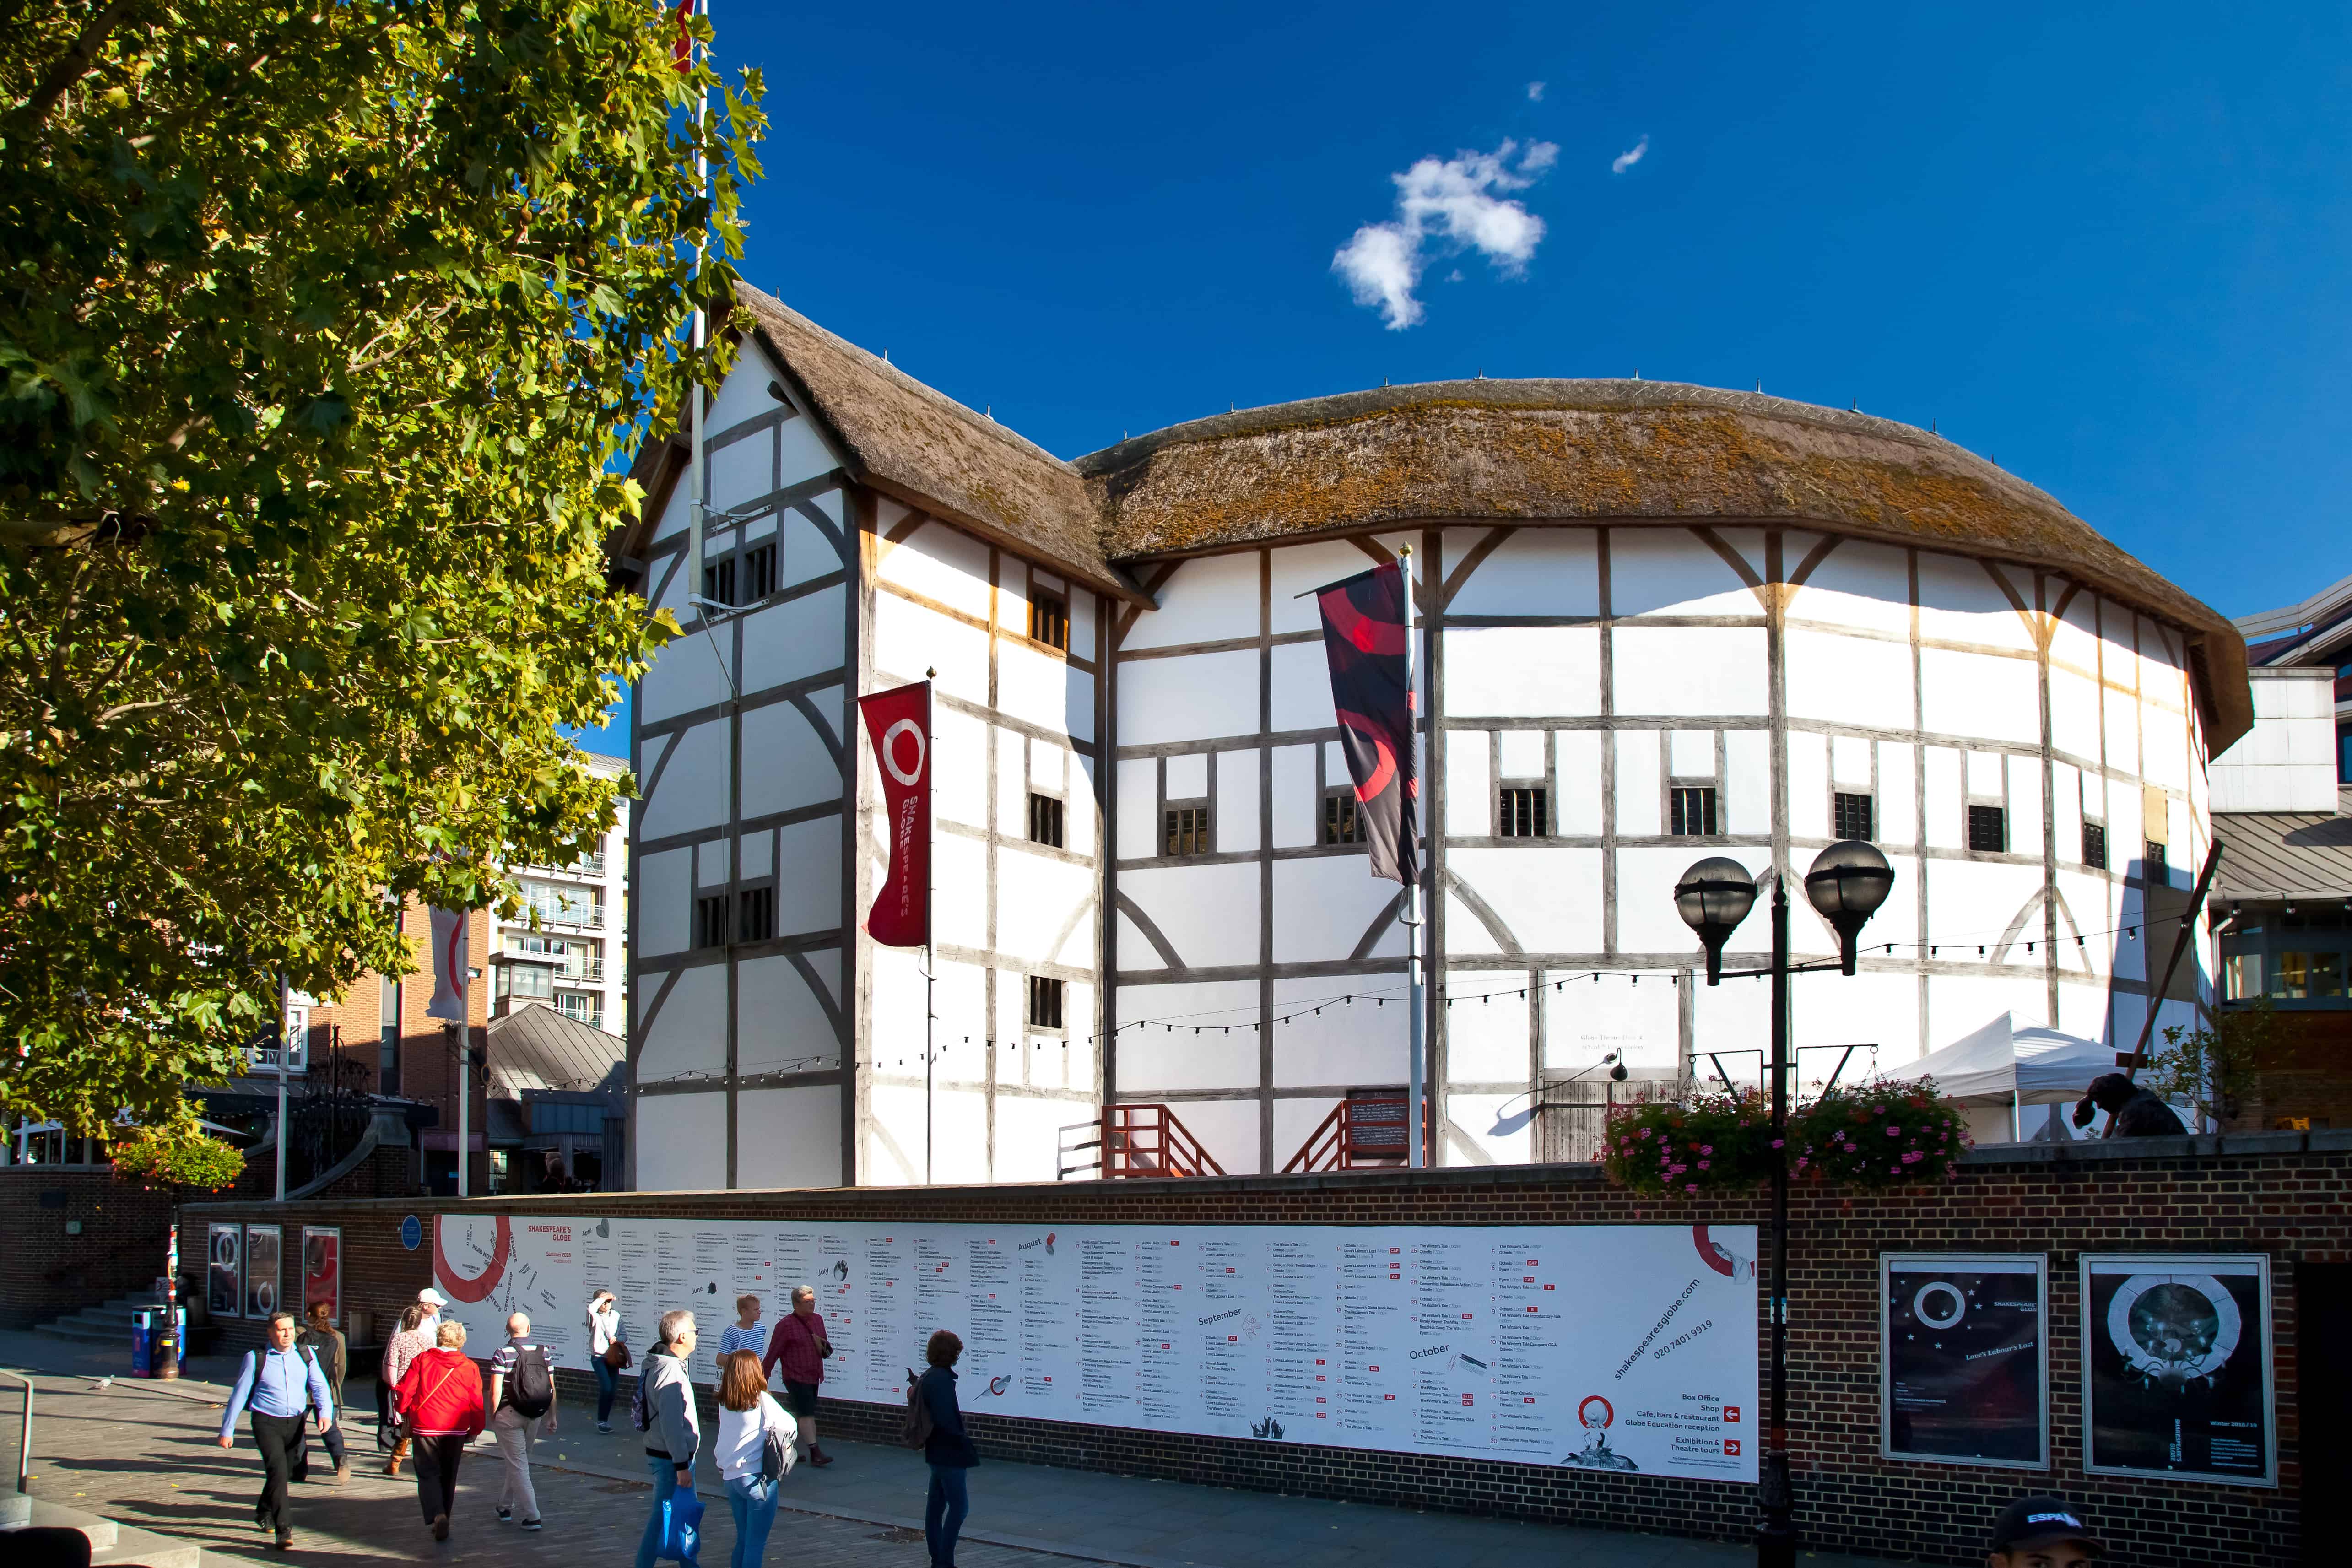 Shakespeare's Globe Theatre. Photo provided by Phoebe Coleman.